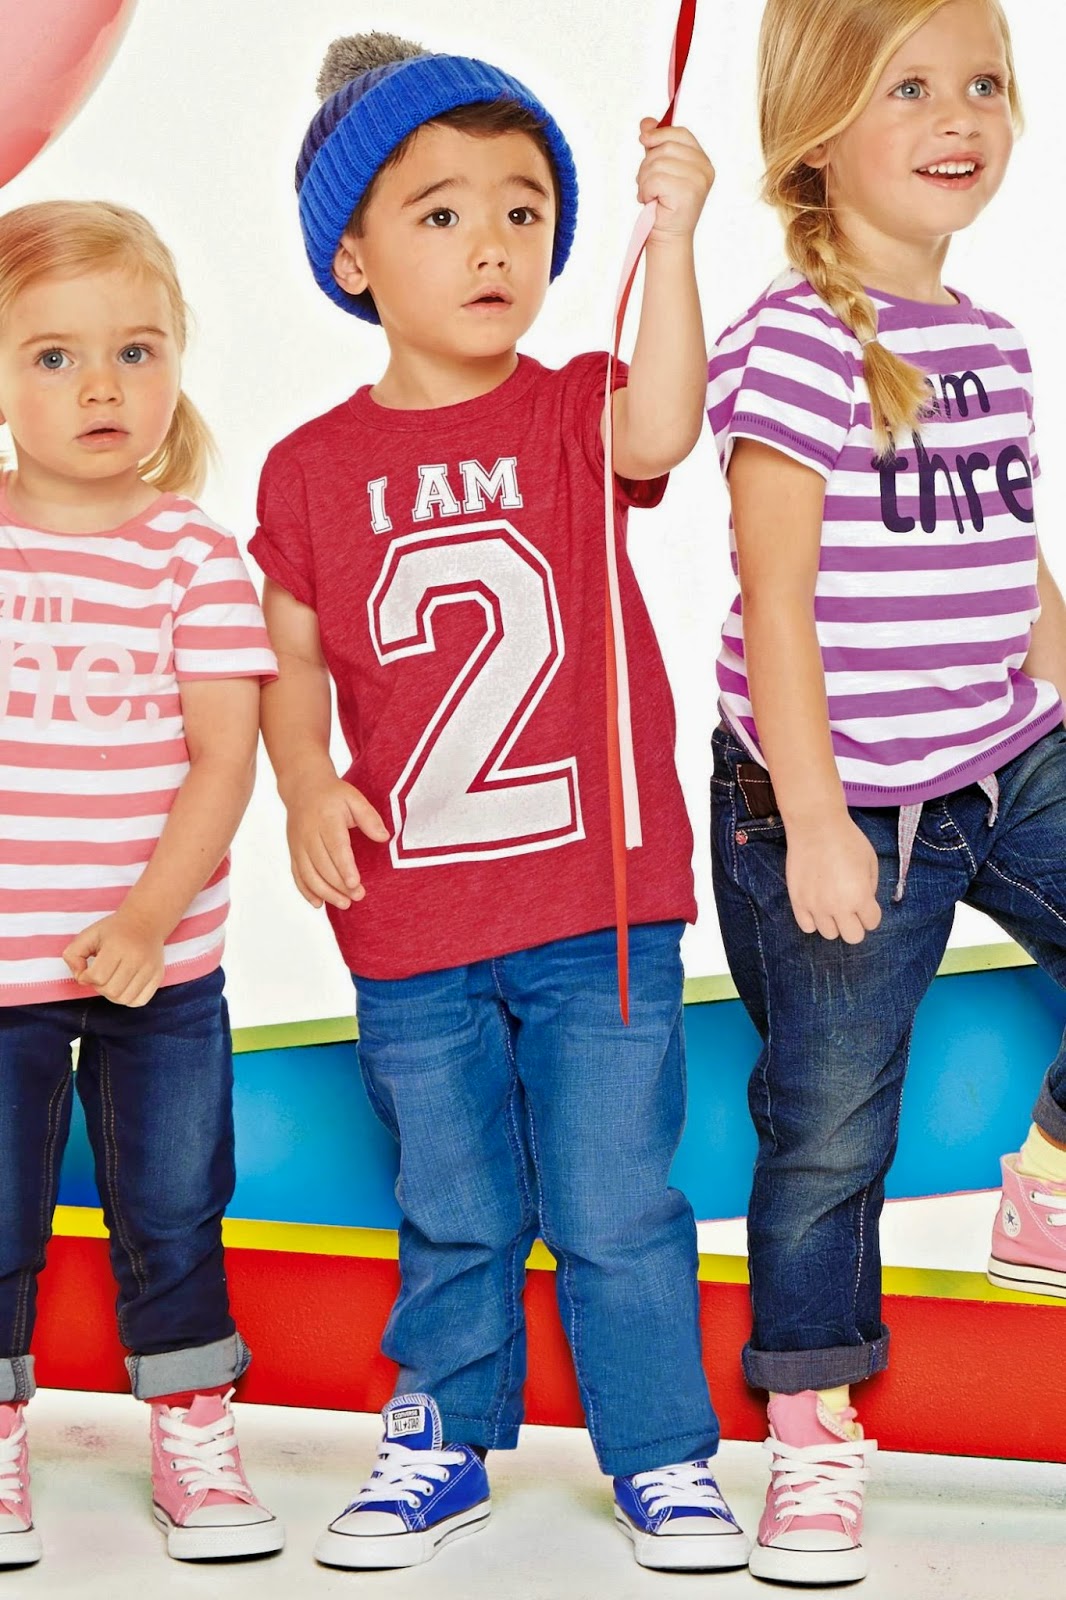 The perfect party top for boys and girls… | number tees | I am age t-shirts | birthday tops | birthday fashion | birthday tees | bob & blossom | tutus | next | fashion | kids style | birthday ideas | birthday week | mamasVIB | next directory | style